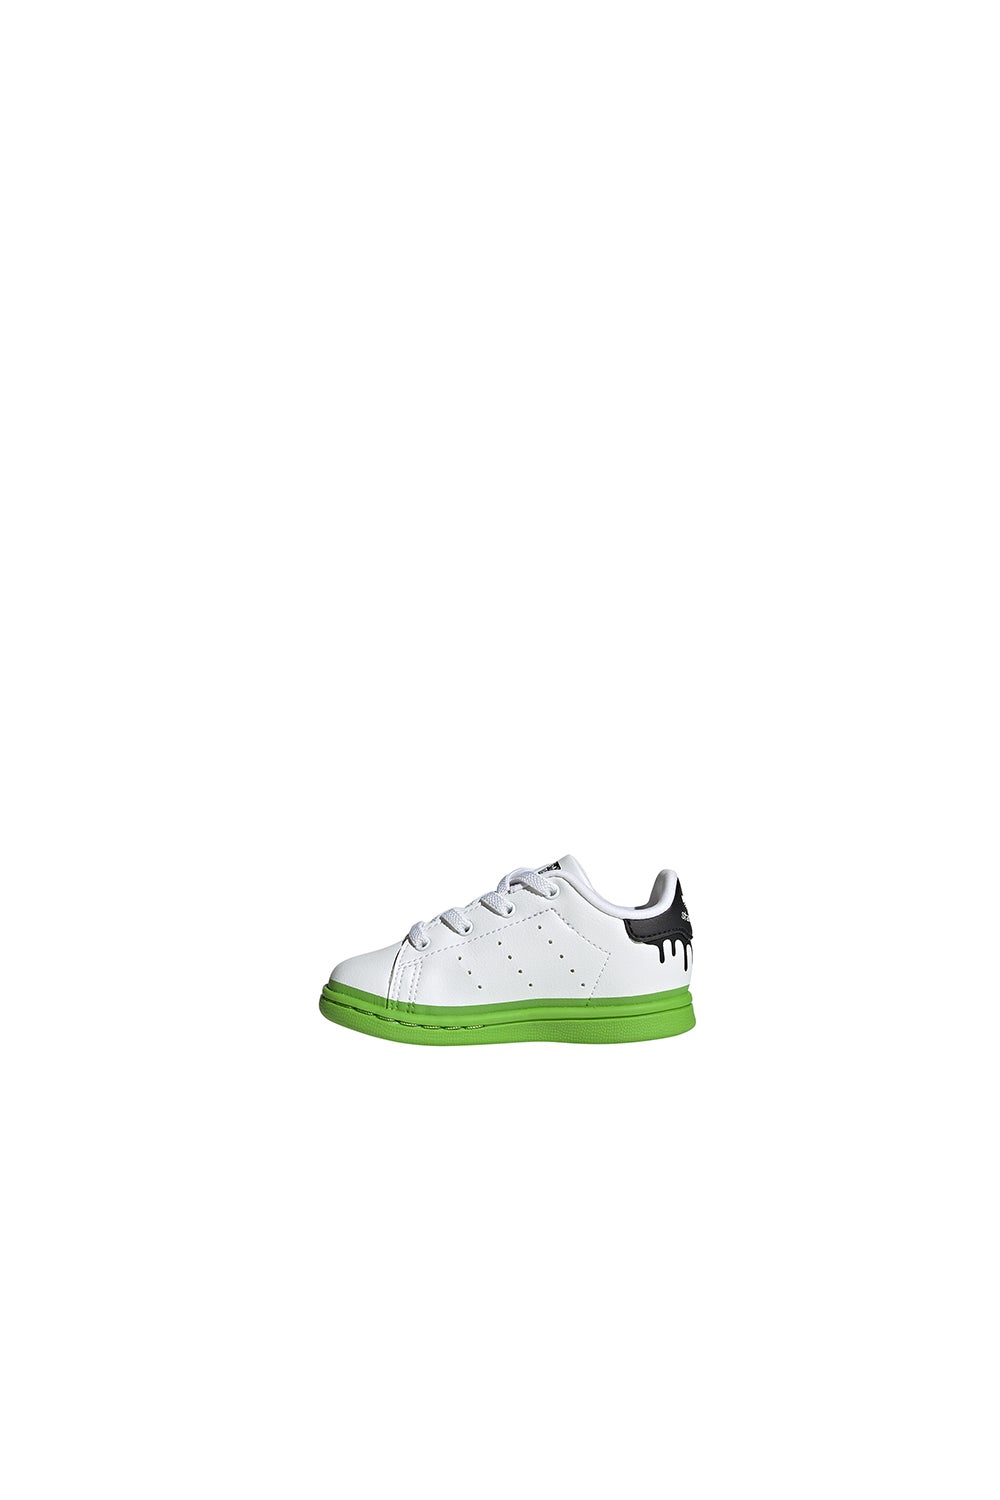 adidas Stan Smith Infant Shoes Cloud White/Team Semi Solid Green